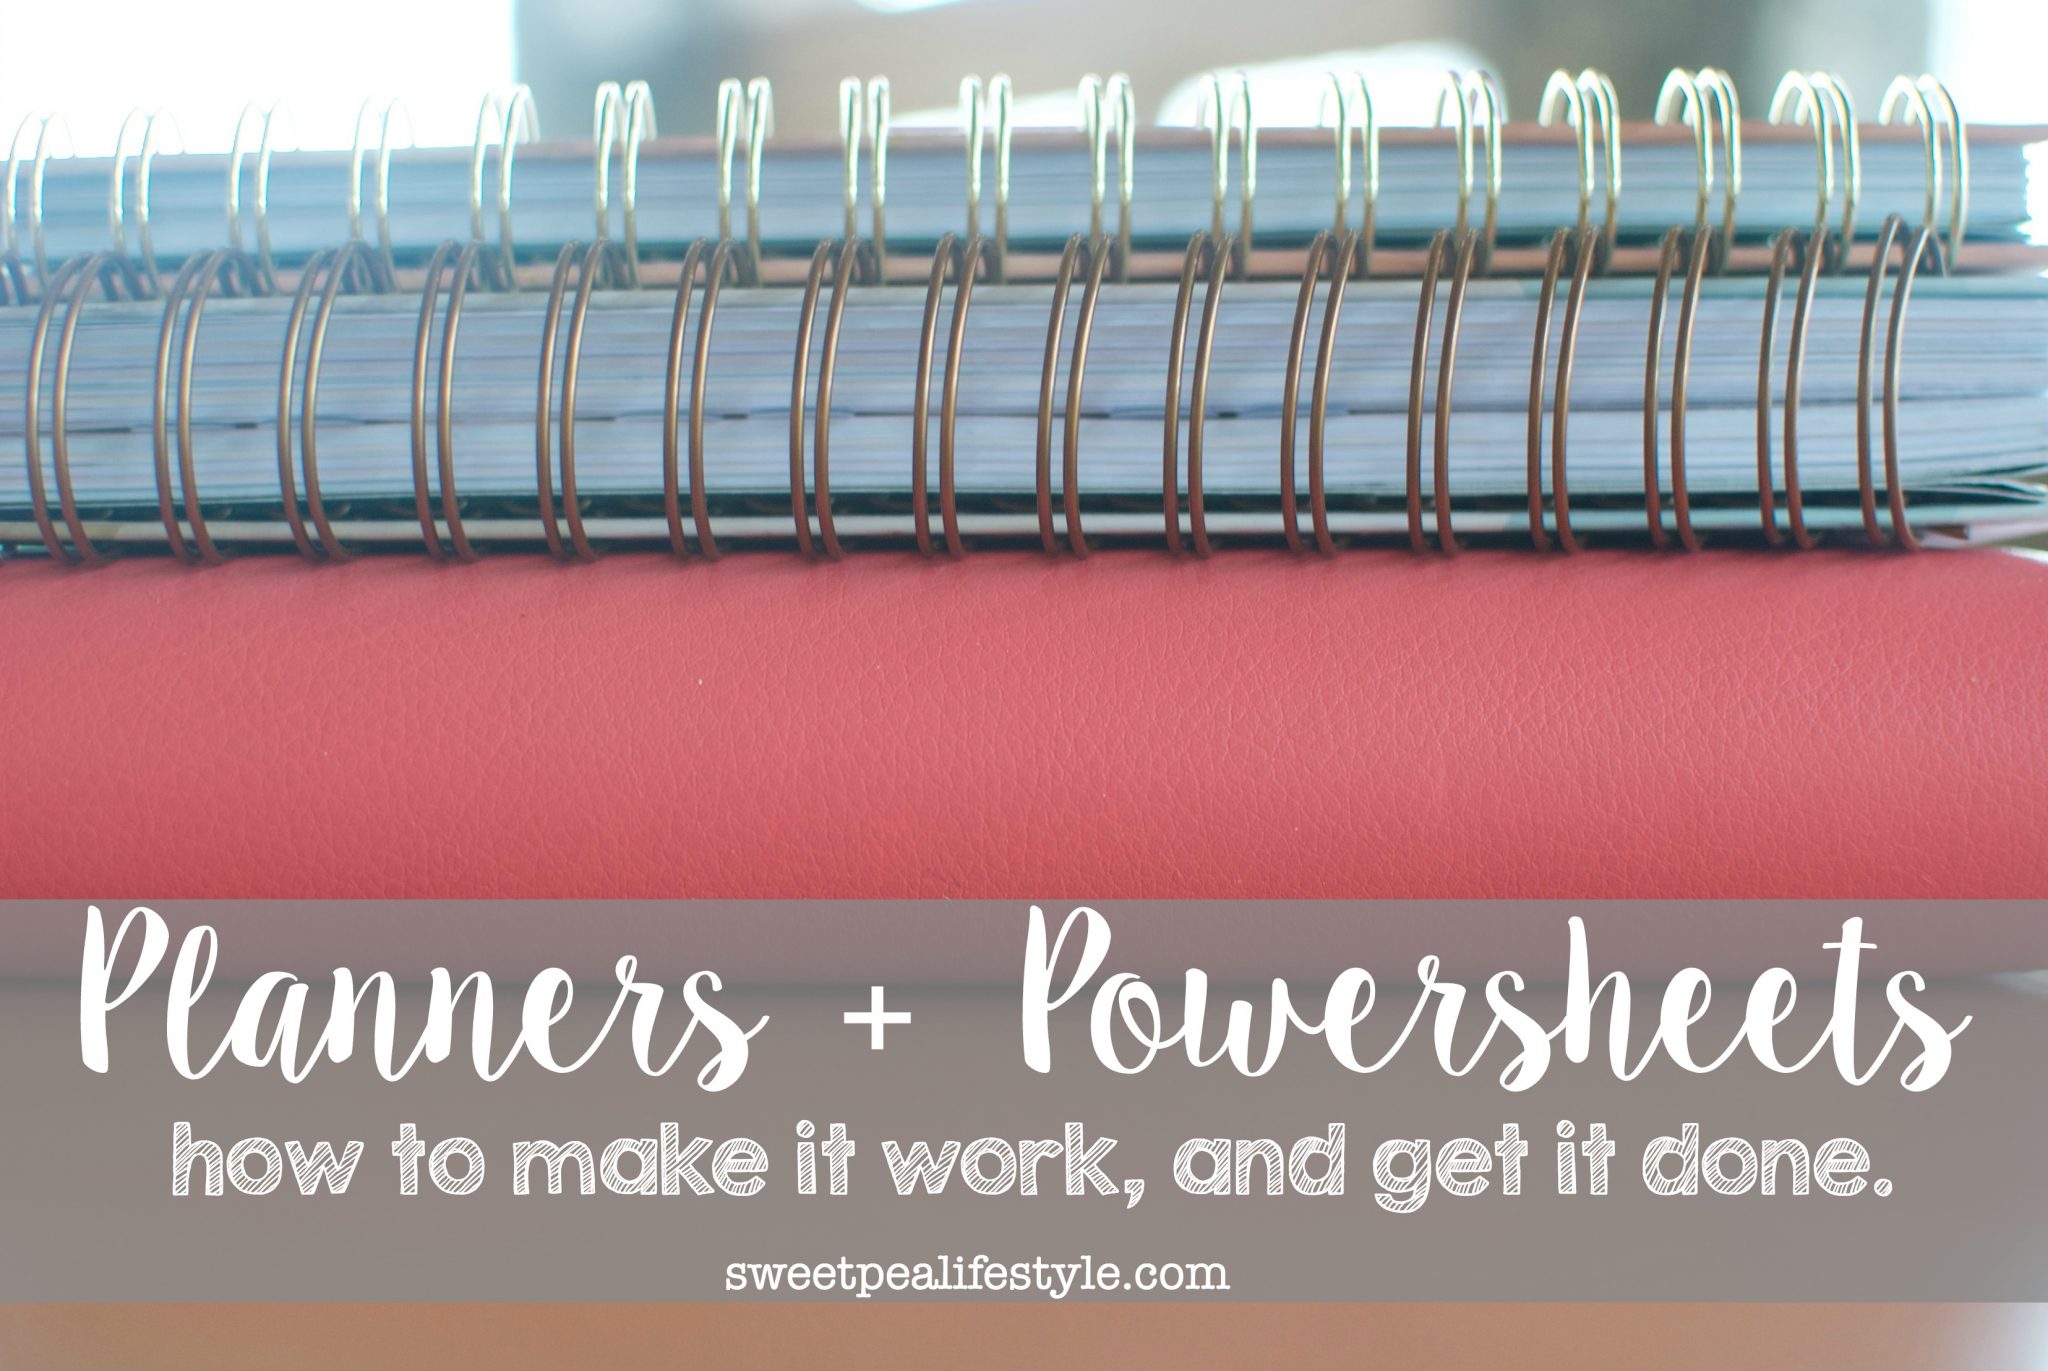 Planners + Powersheets